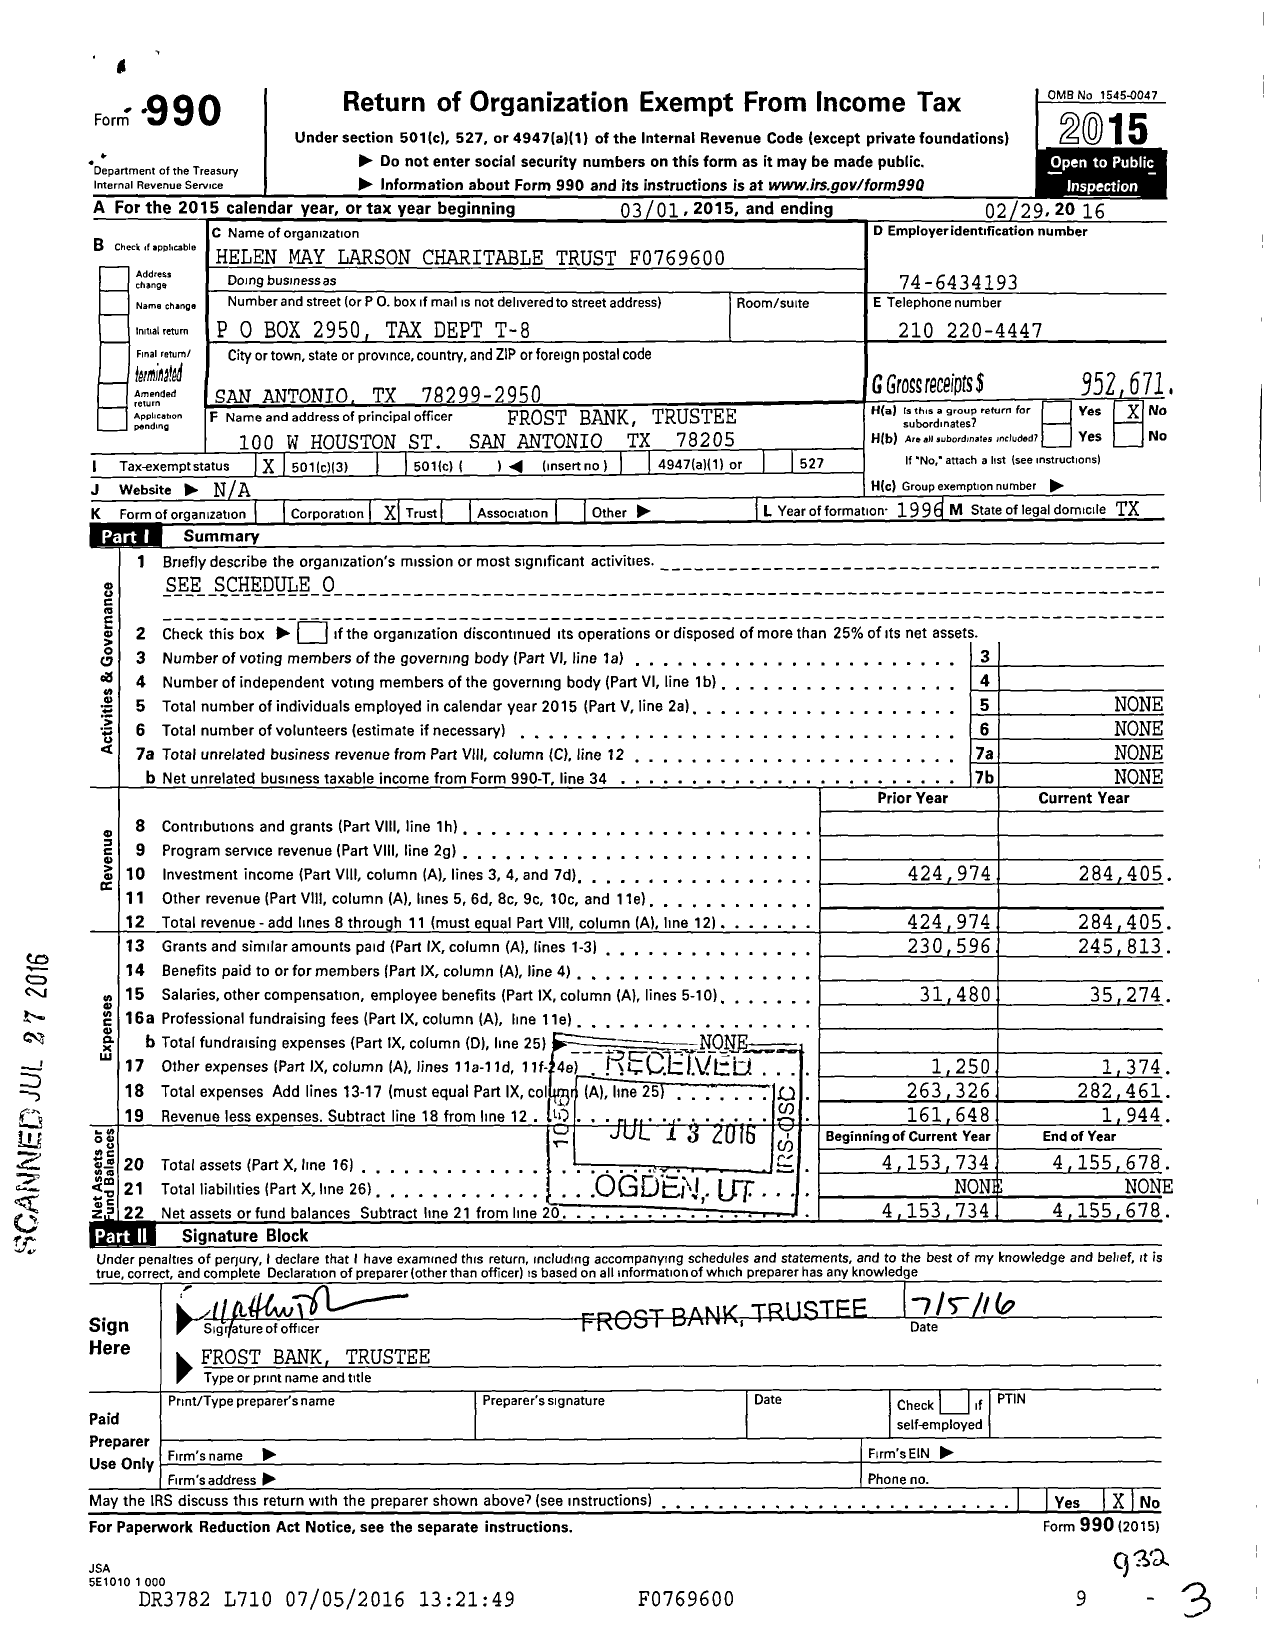 Image of first page of 2015 Form 990 for Helen May Larson Charitable Trust F0769600